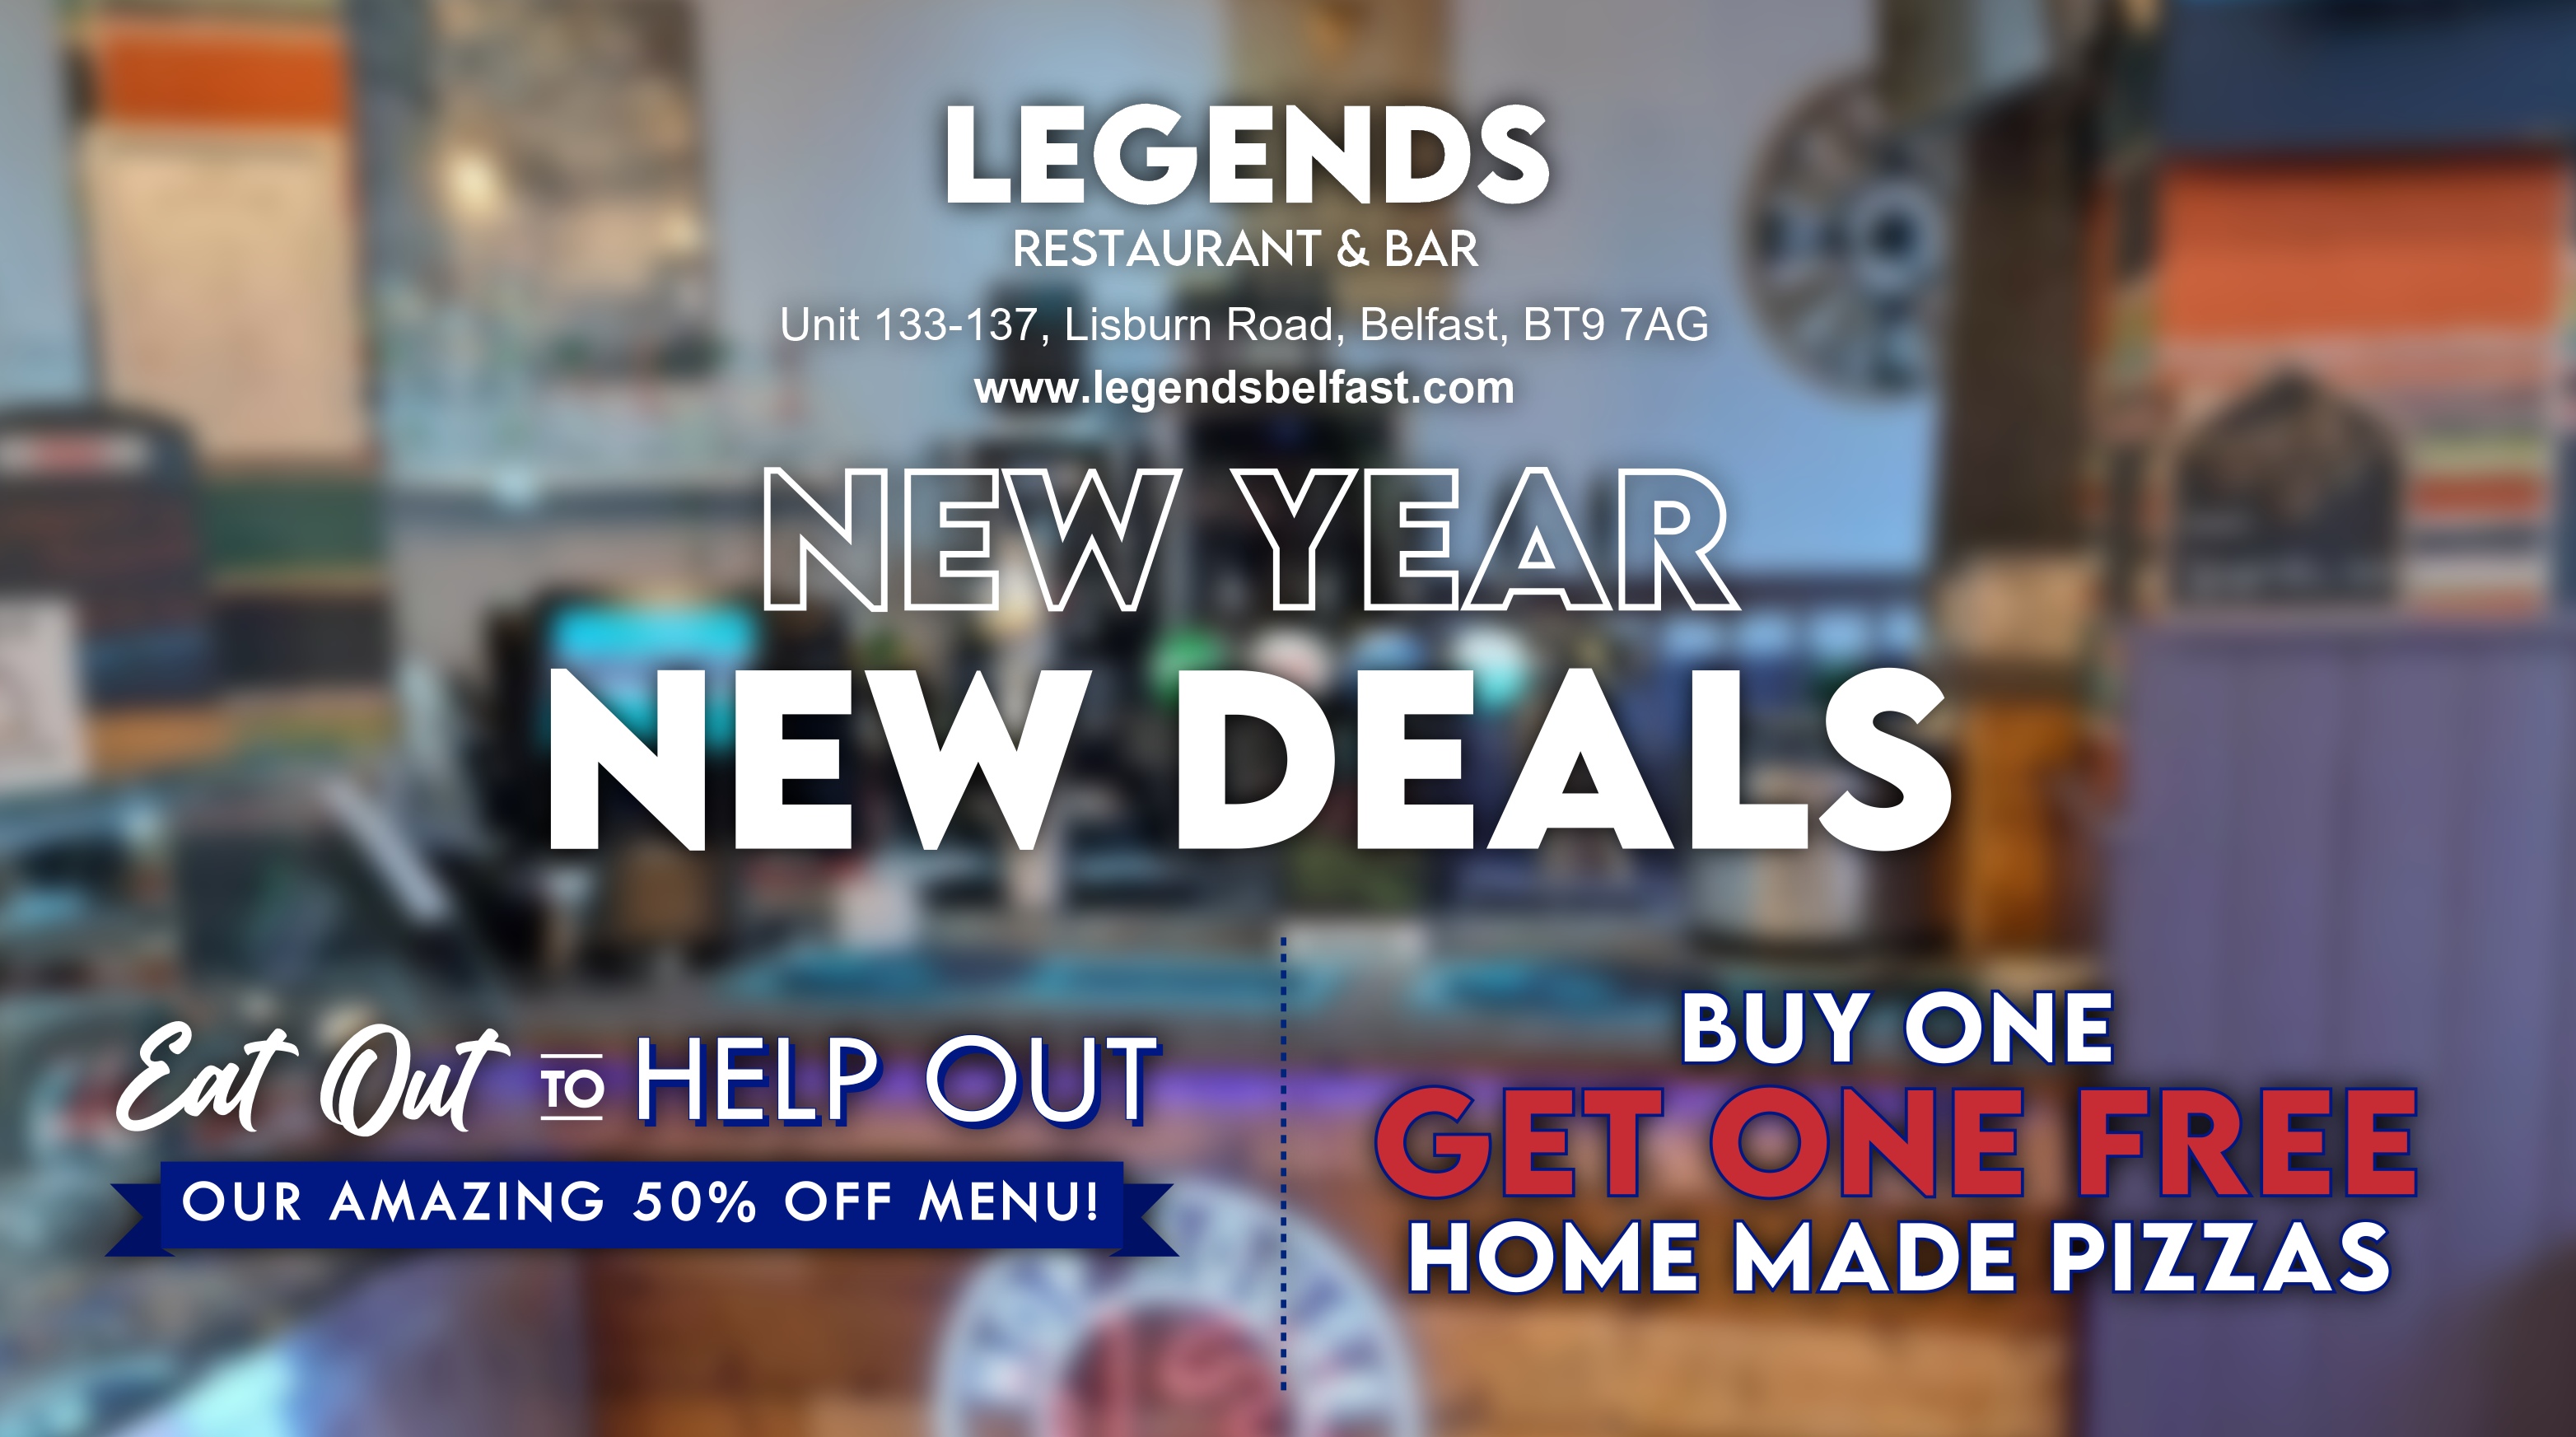 New Year, New Deals at Legends Restaurant & Bar in Belfast! Head down to Lisburn Road this January and enjoy our delicious 50% off Eat Out To Help Out Lunch Menu or try one of our Buy One Get One Free Pizzas!